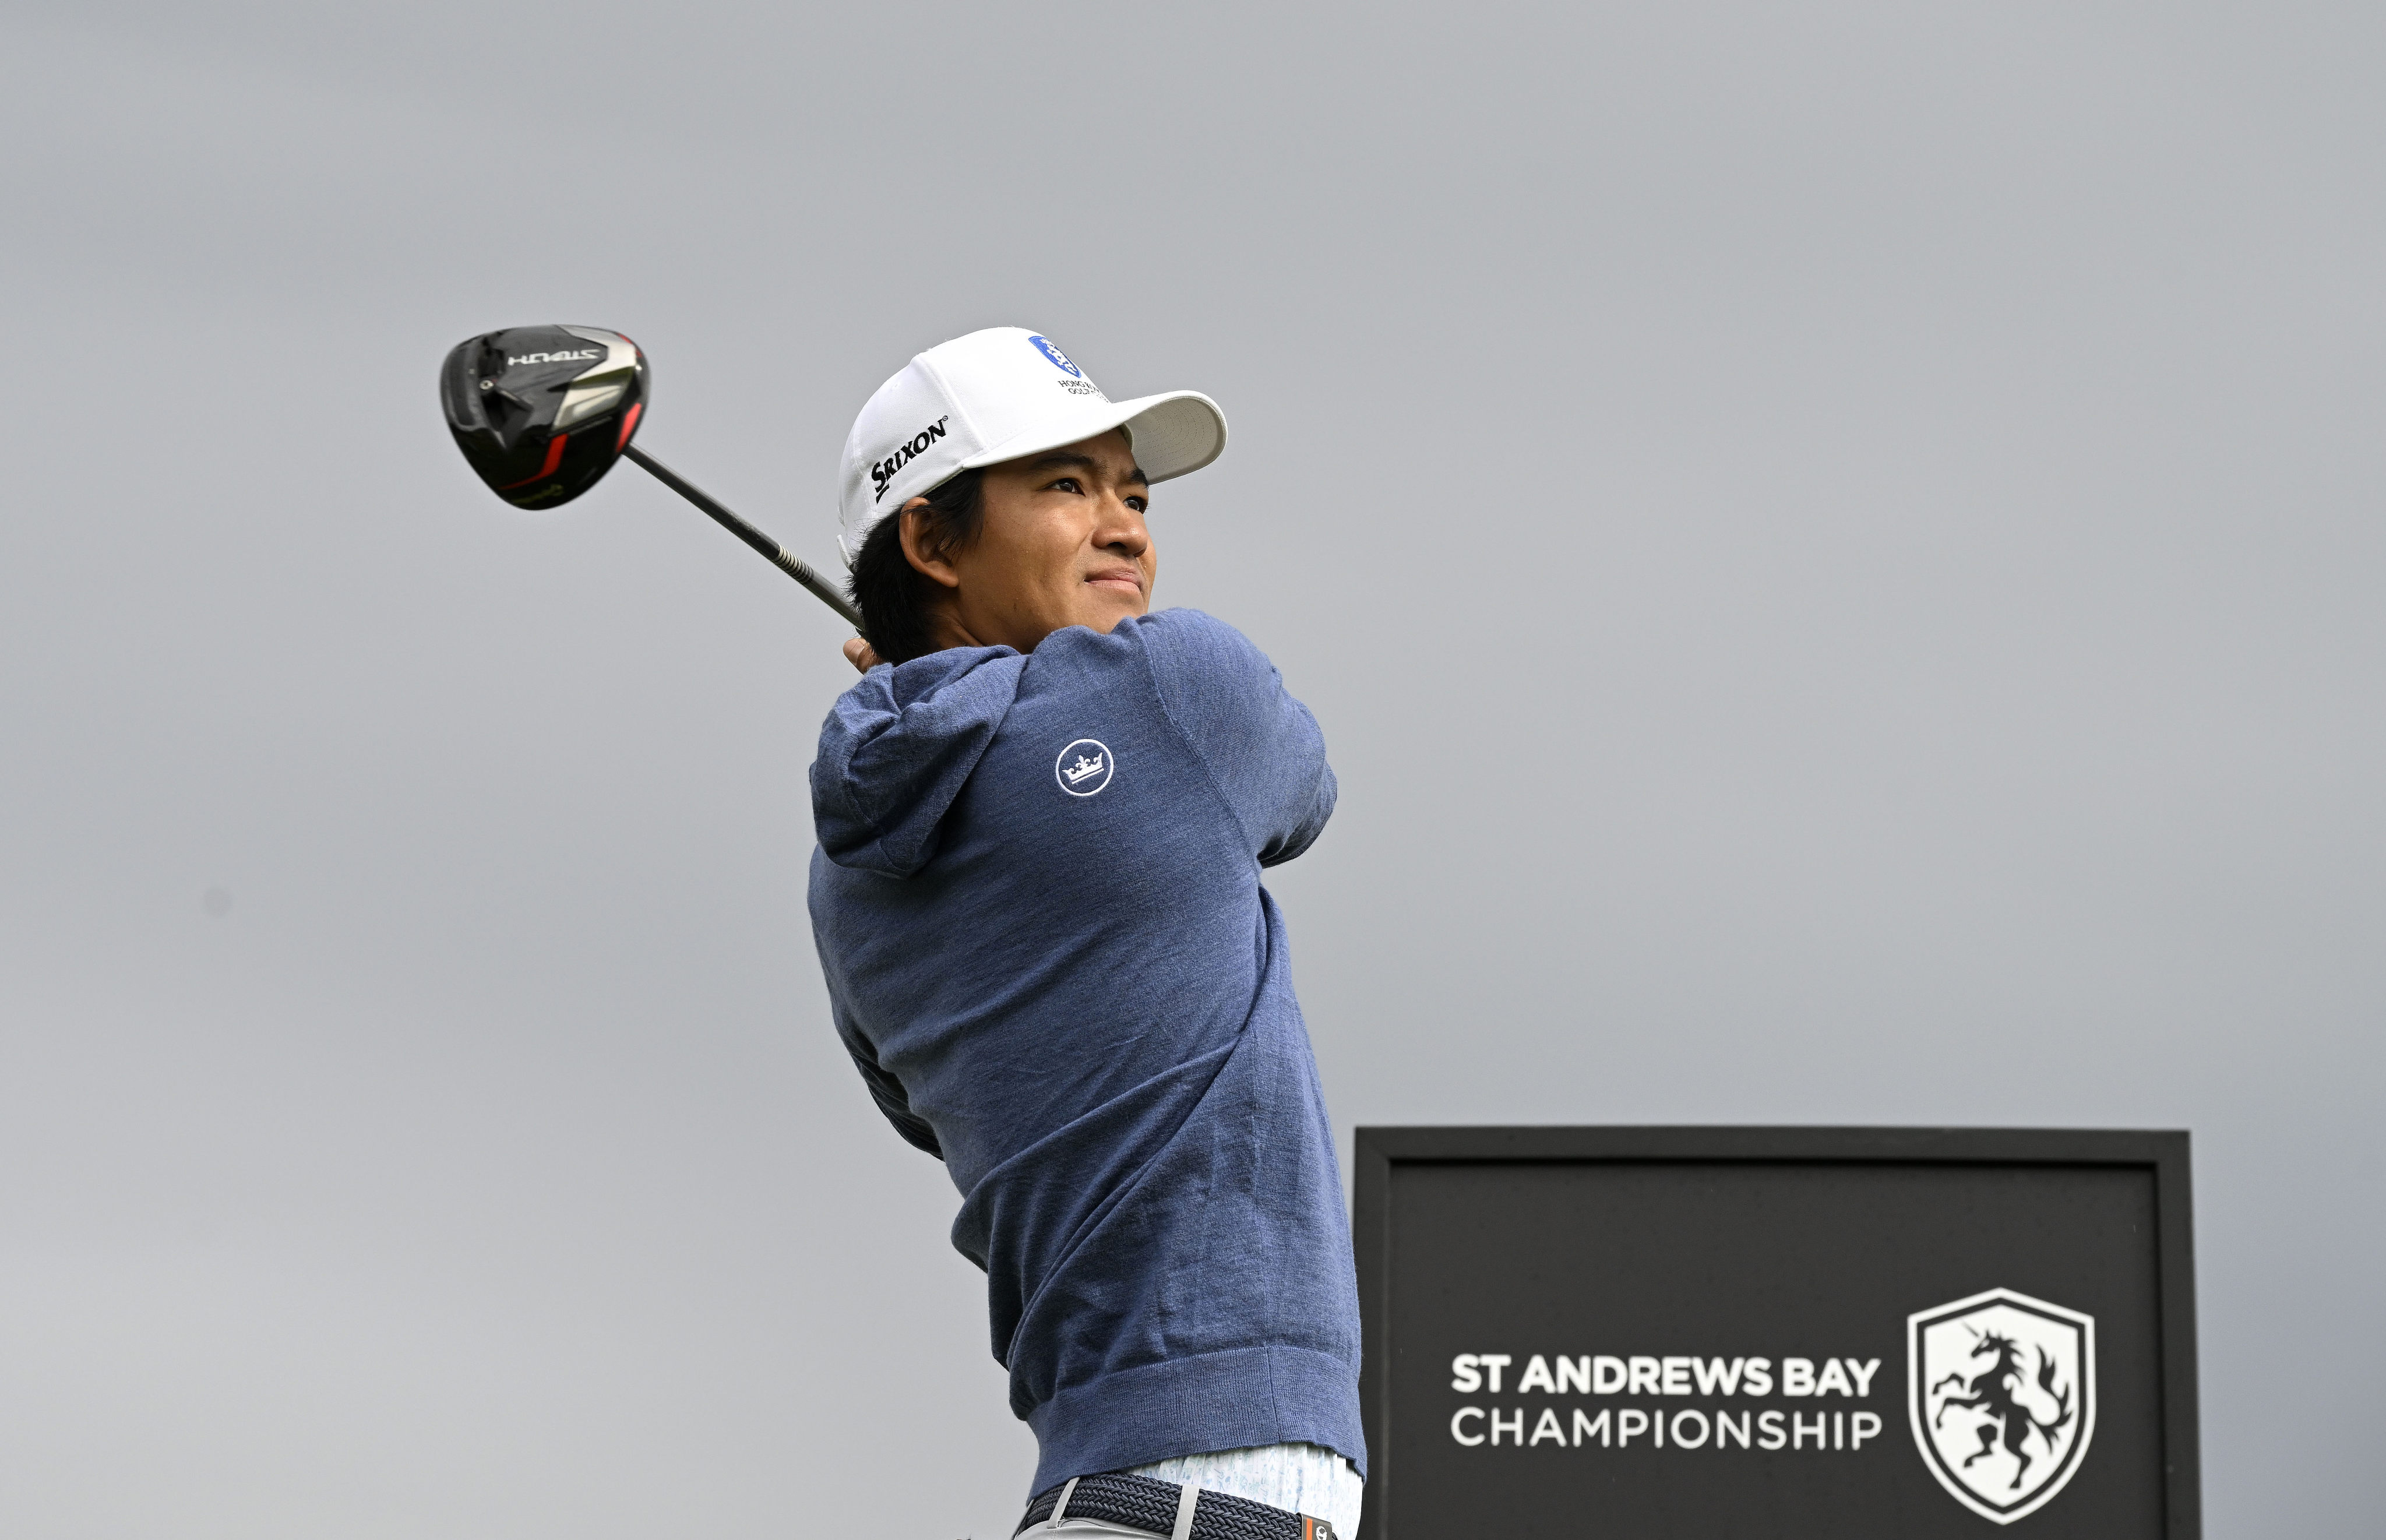 Hong Kong’s Taichi Kho during the pro-am ahead of the St Andrews Bay Championship at the Fairmont St Andrews. Photo: Asian Tour.